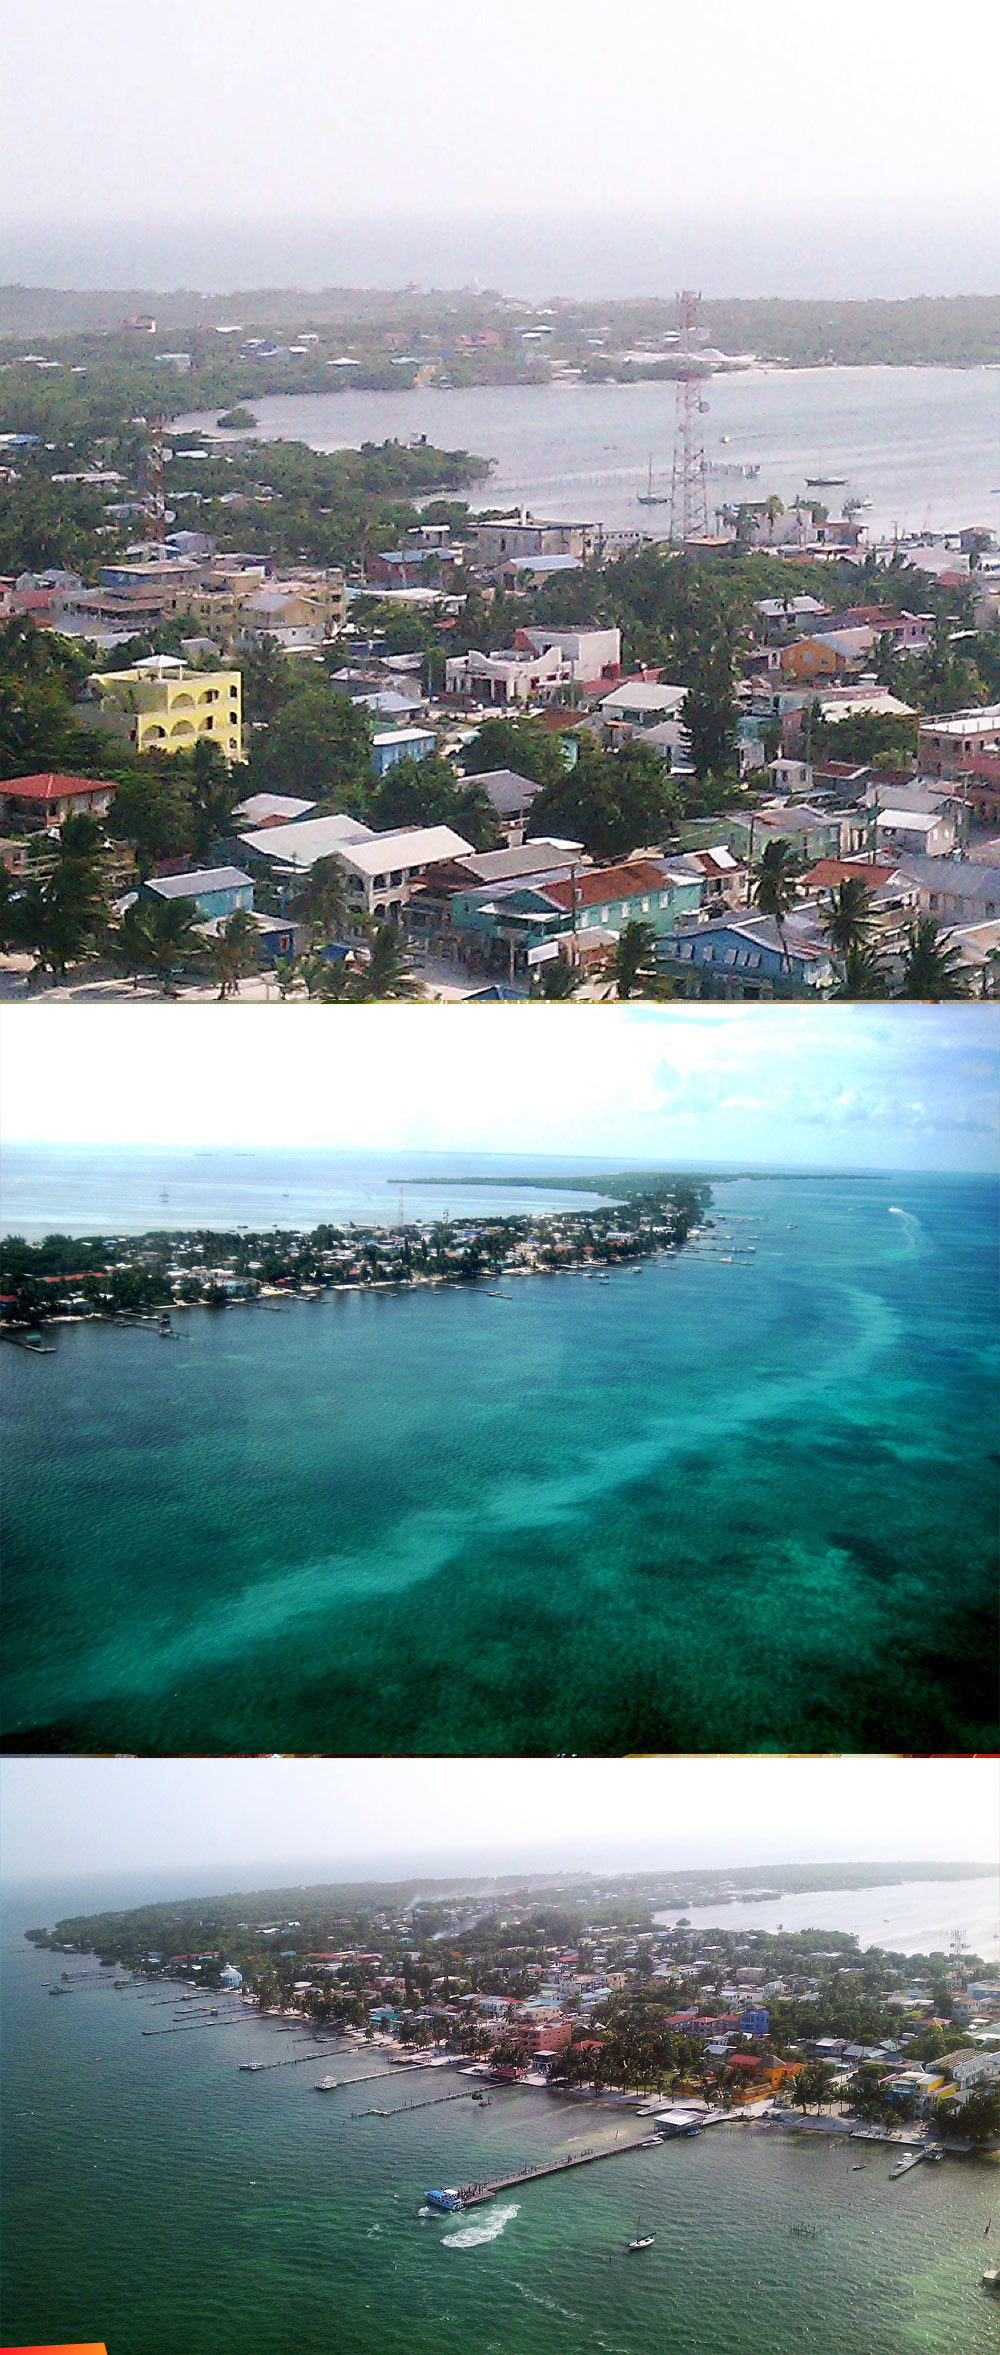 Three views of Caye Caulker from the air